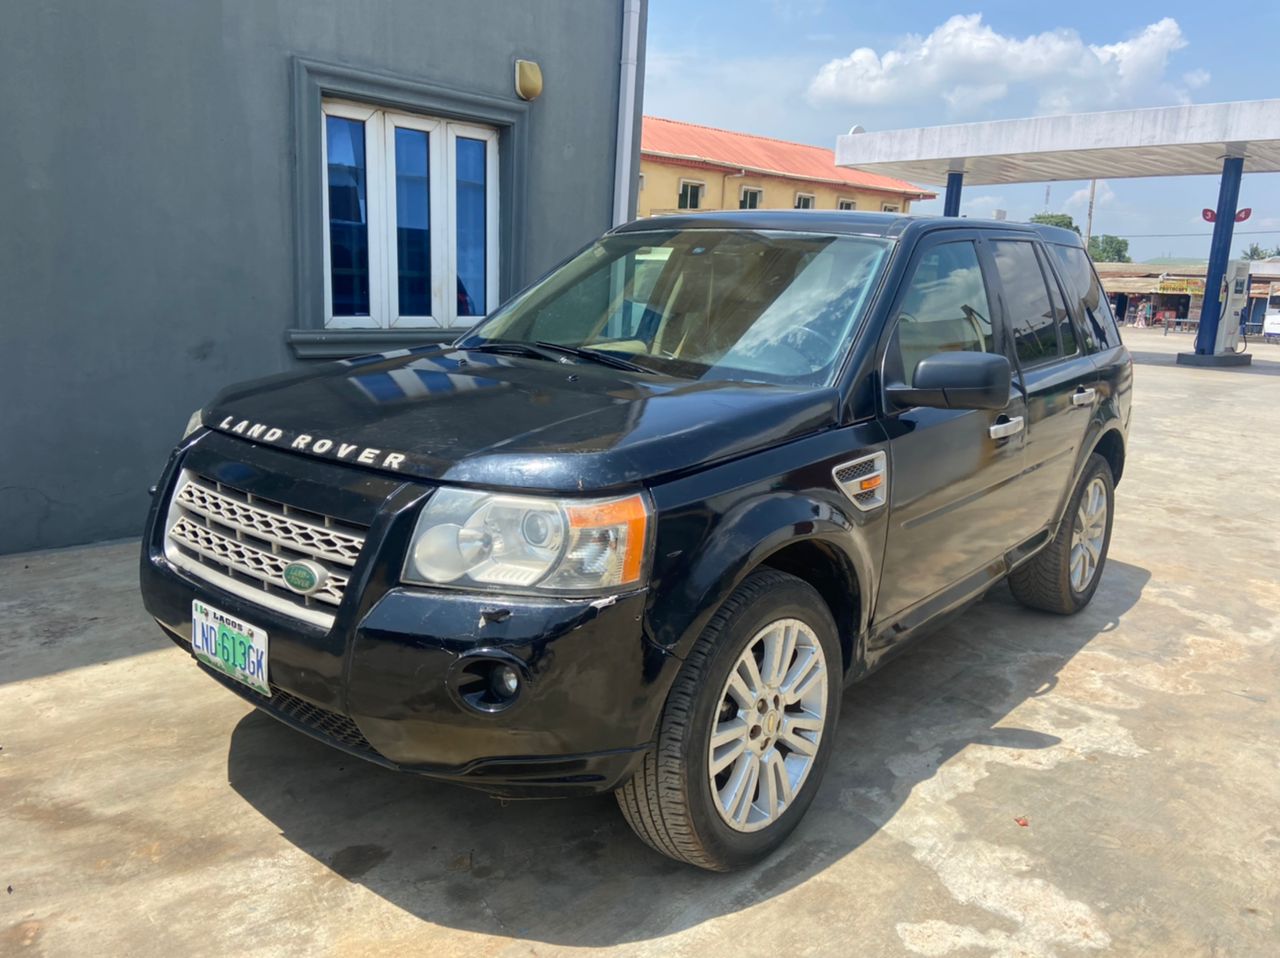 Buy 2008 used Land-rover Lr2 Lagos